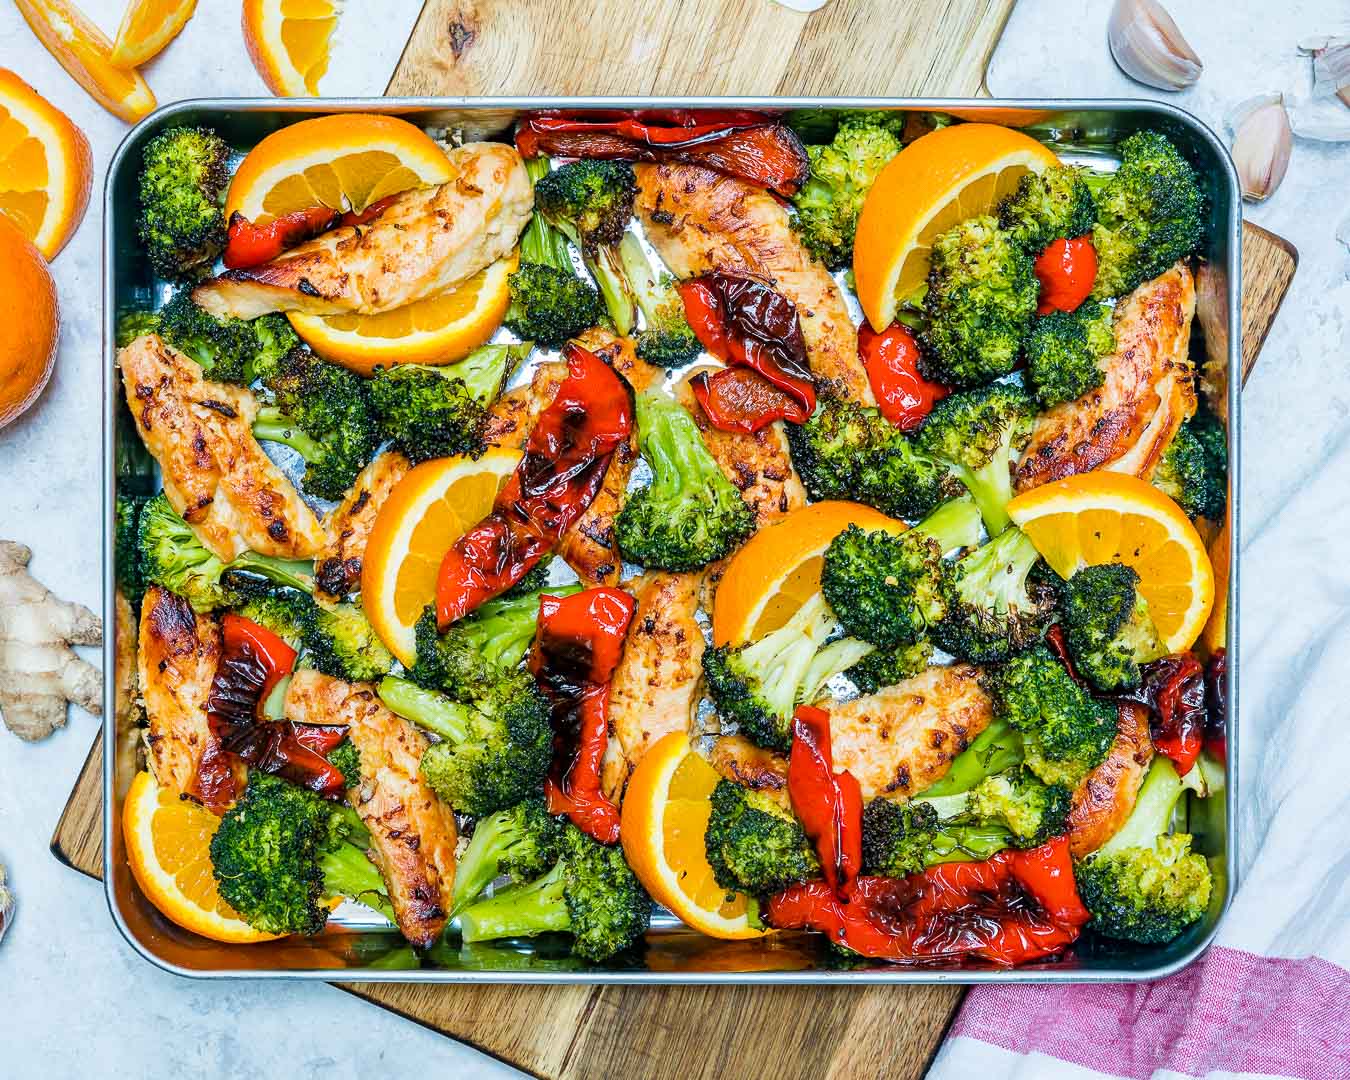 Try this Clean Eating Sheet Pan Orange + Ginger Chicken for Dinner